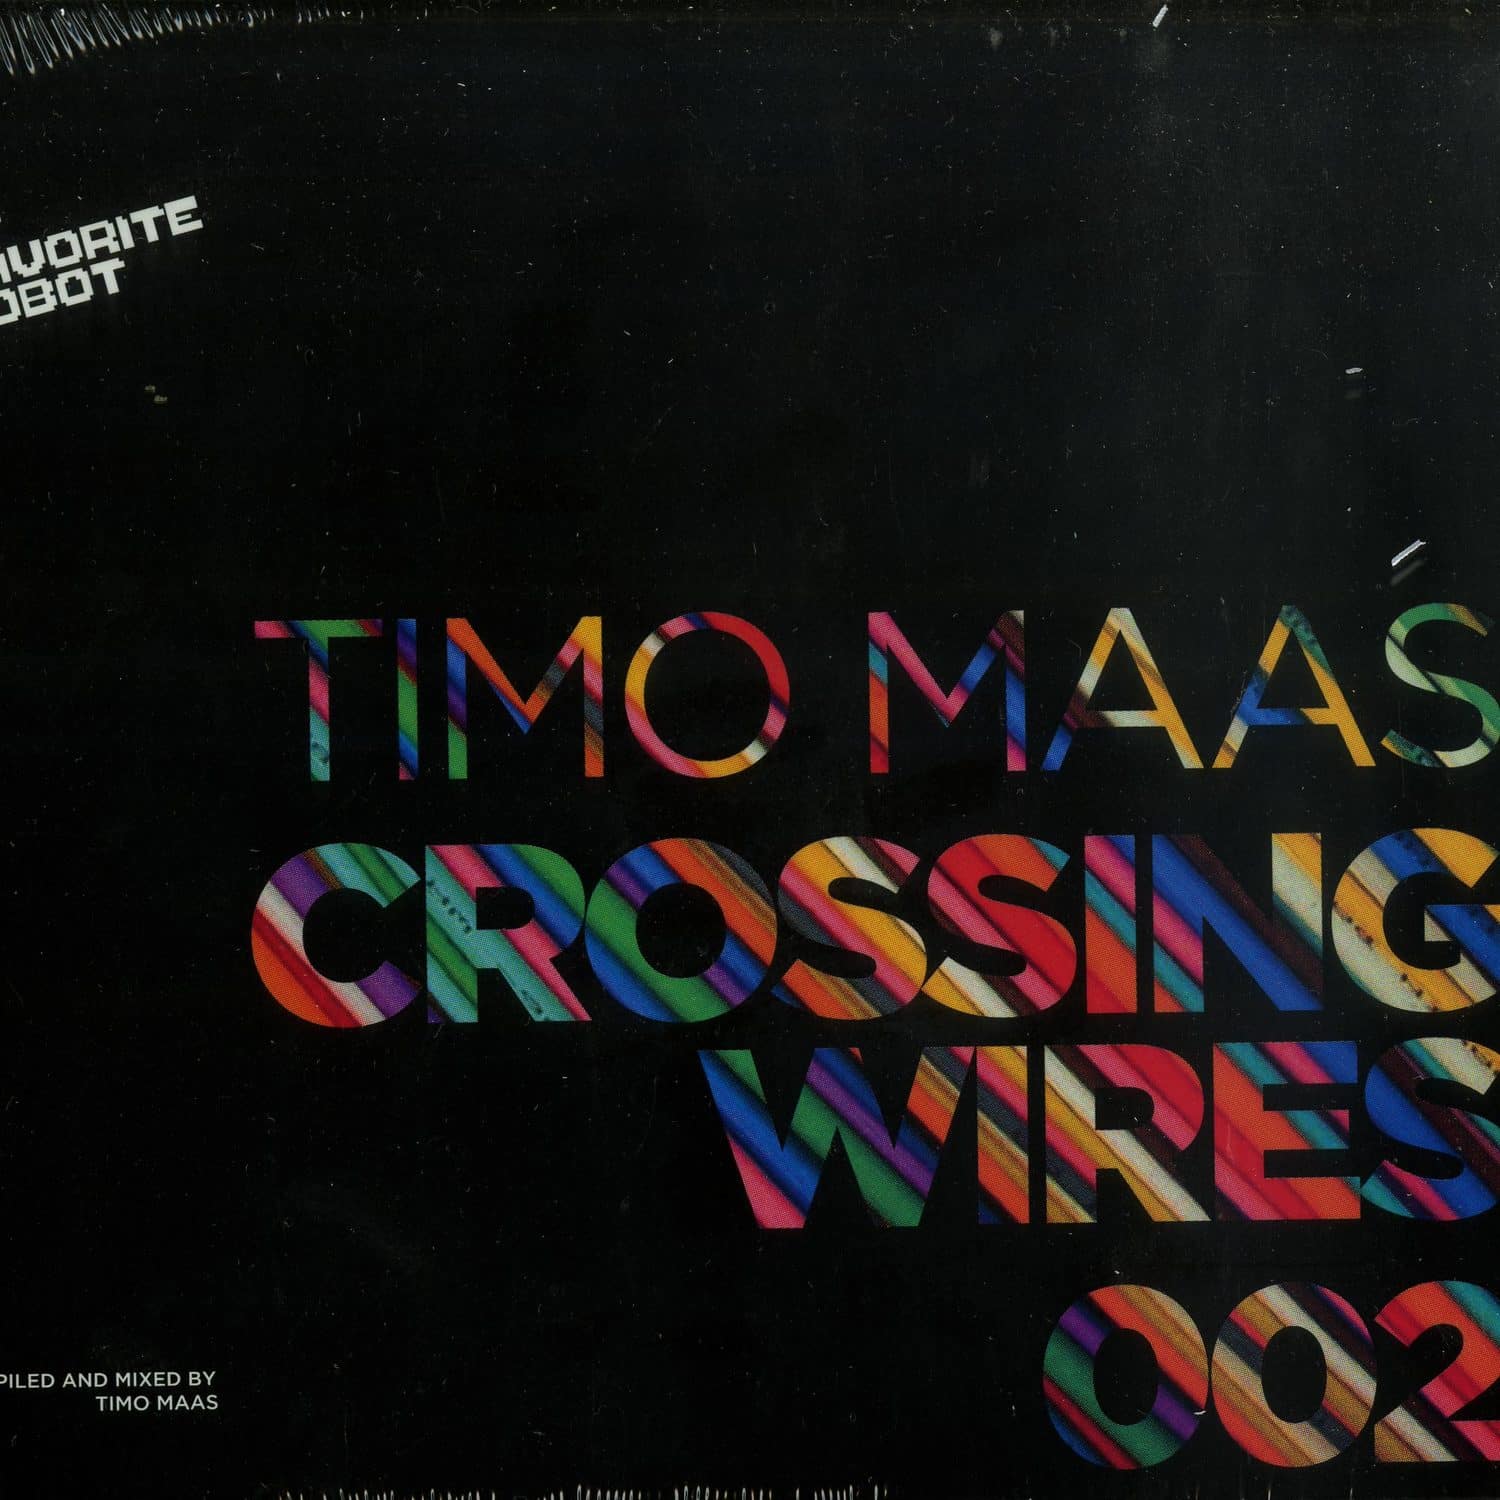 Various Artists - CROSSING WIRES 002 